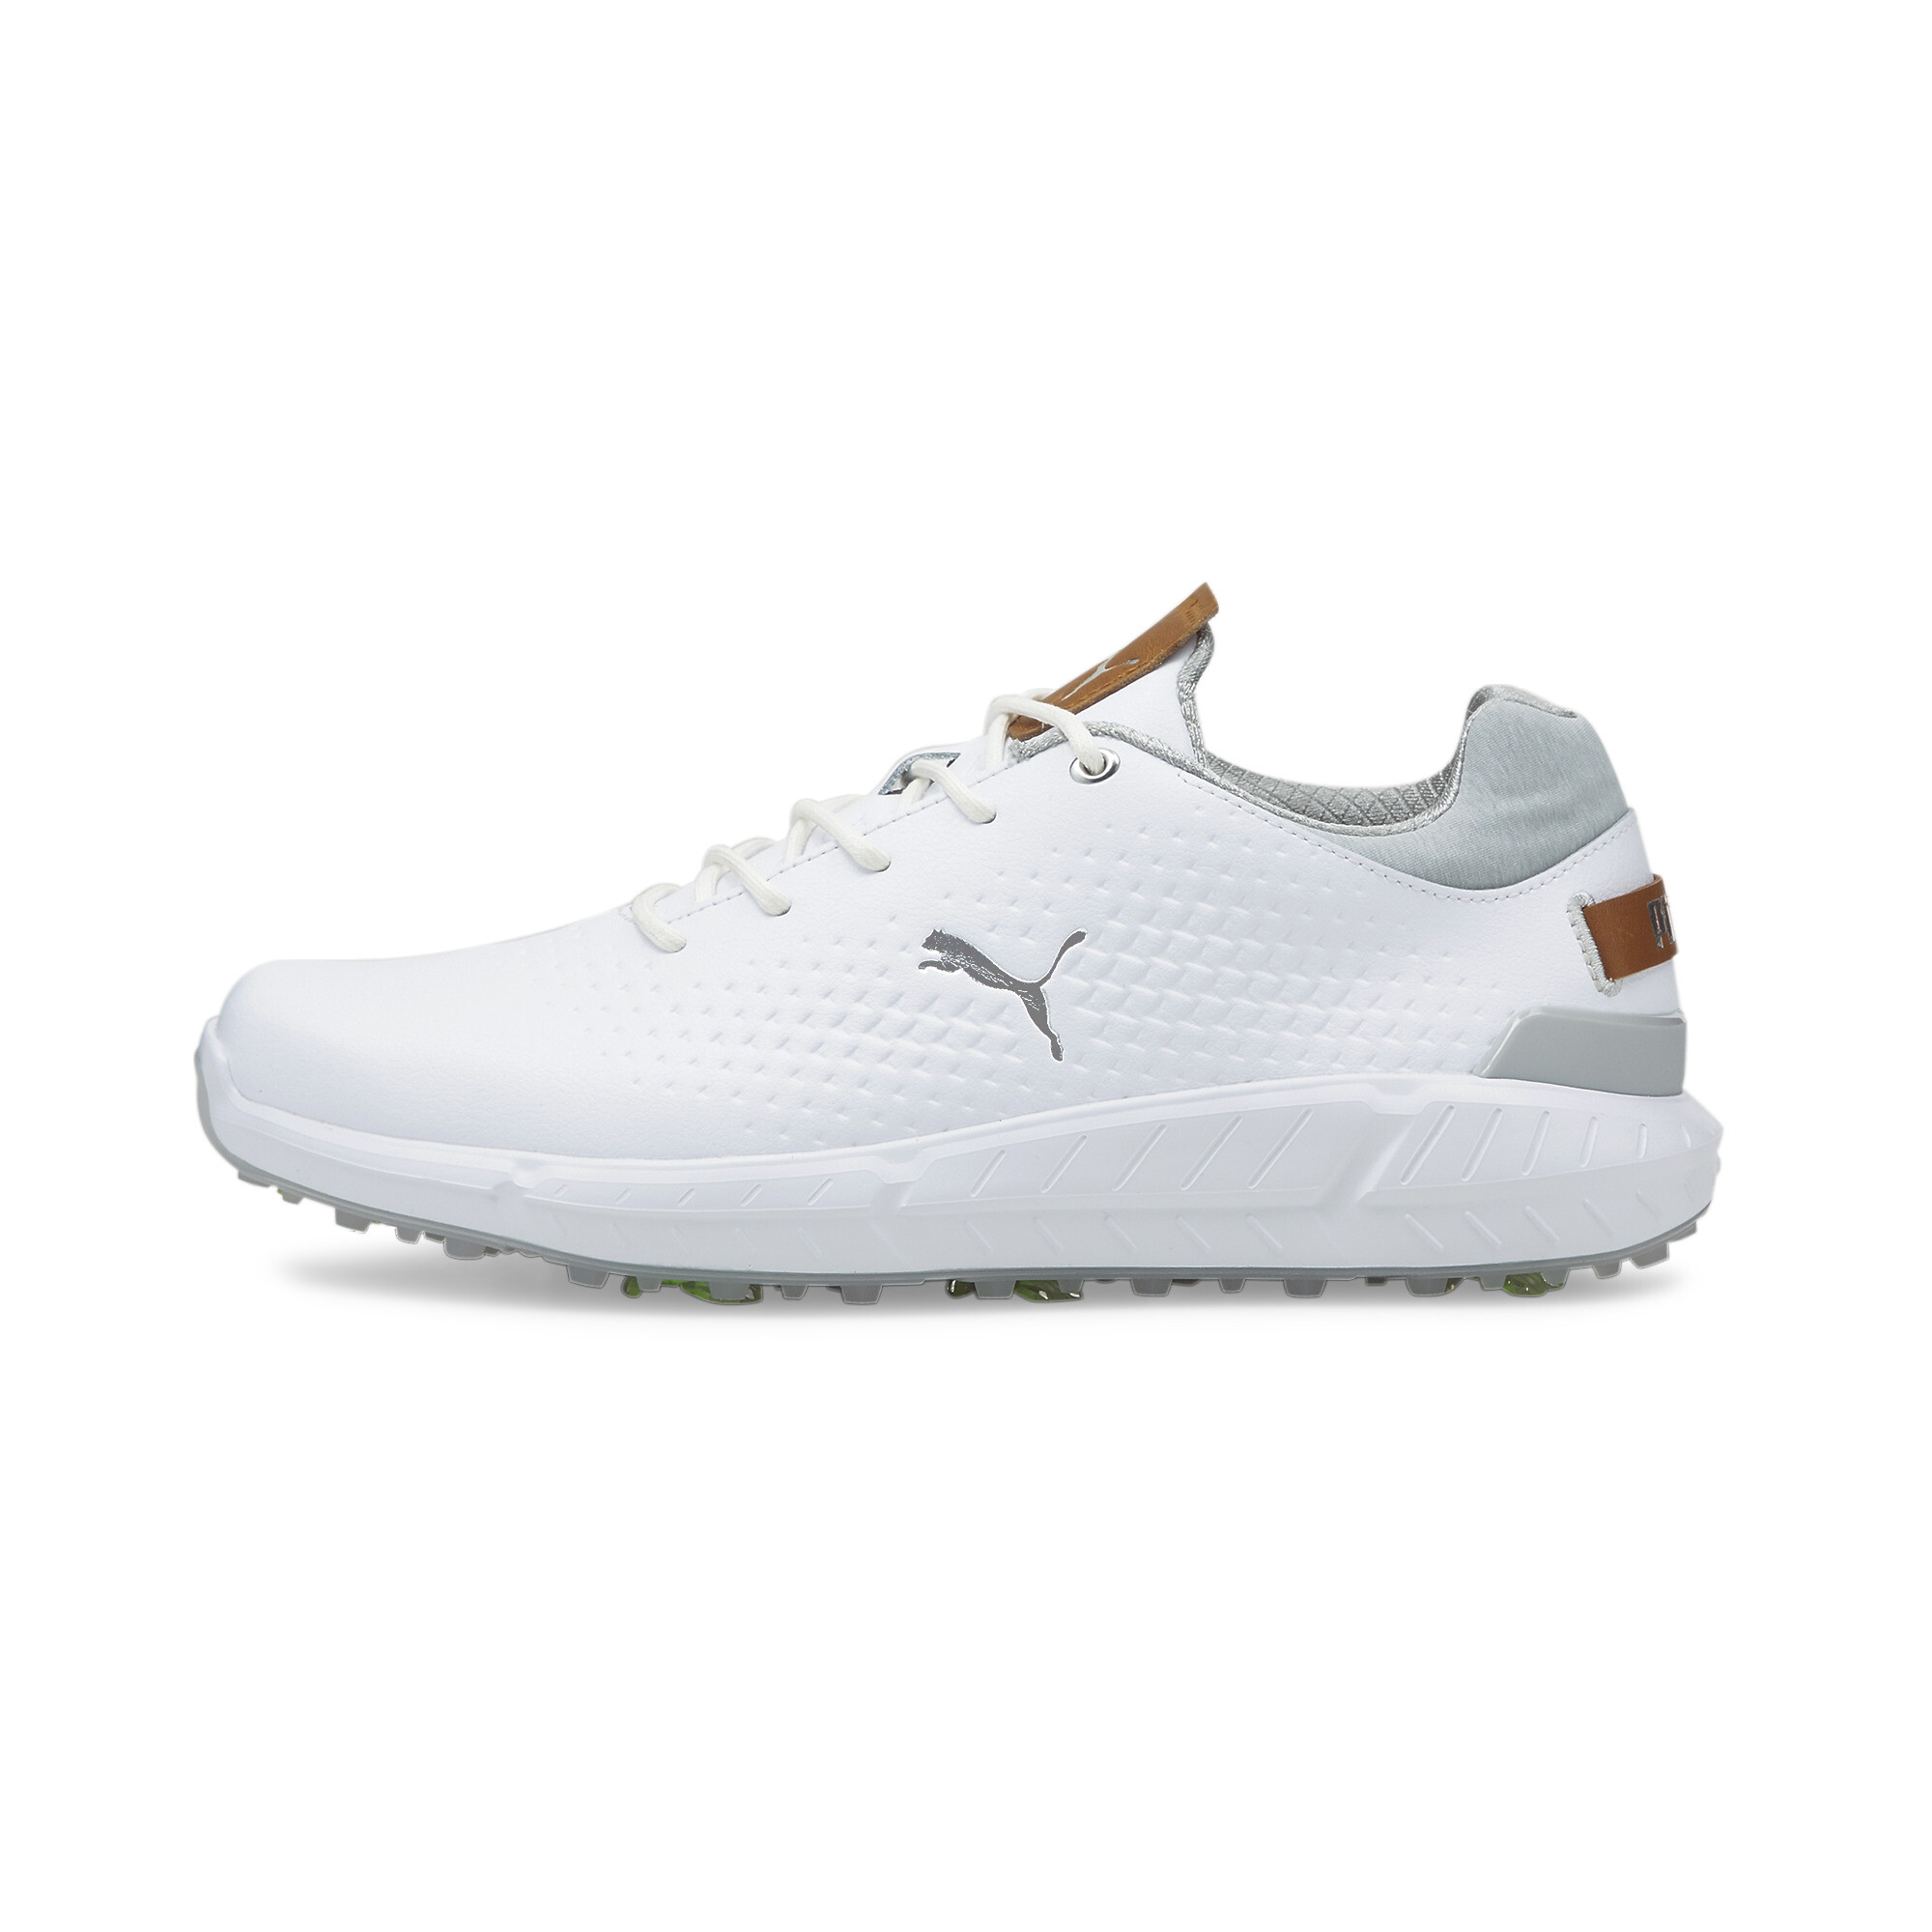 Ladies Golf Shoes South Africa | escapeauthority.com